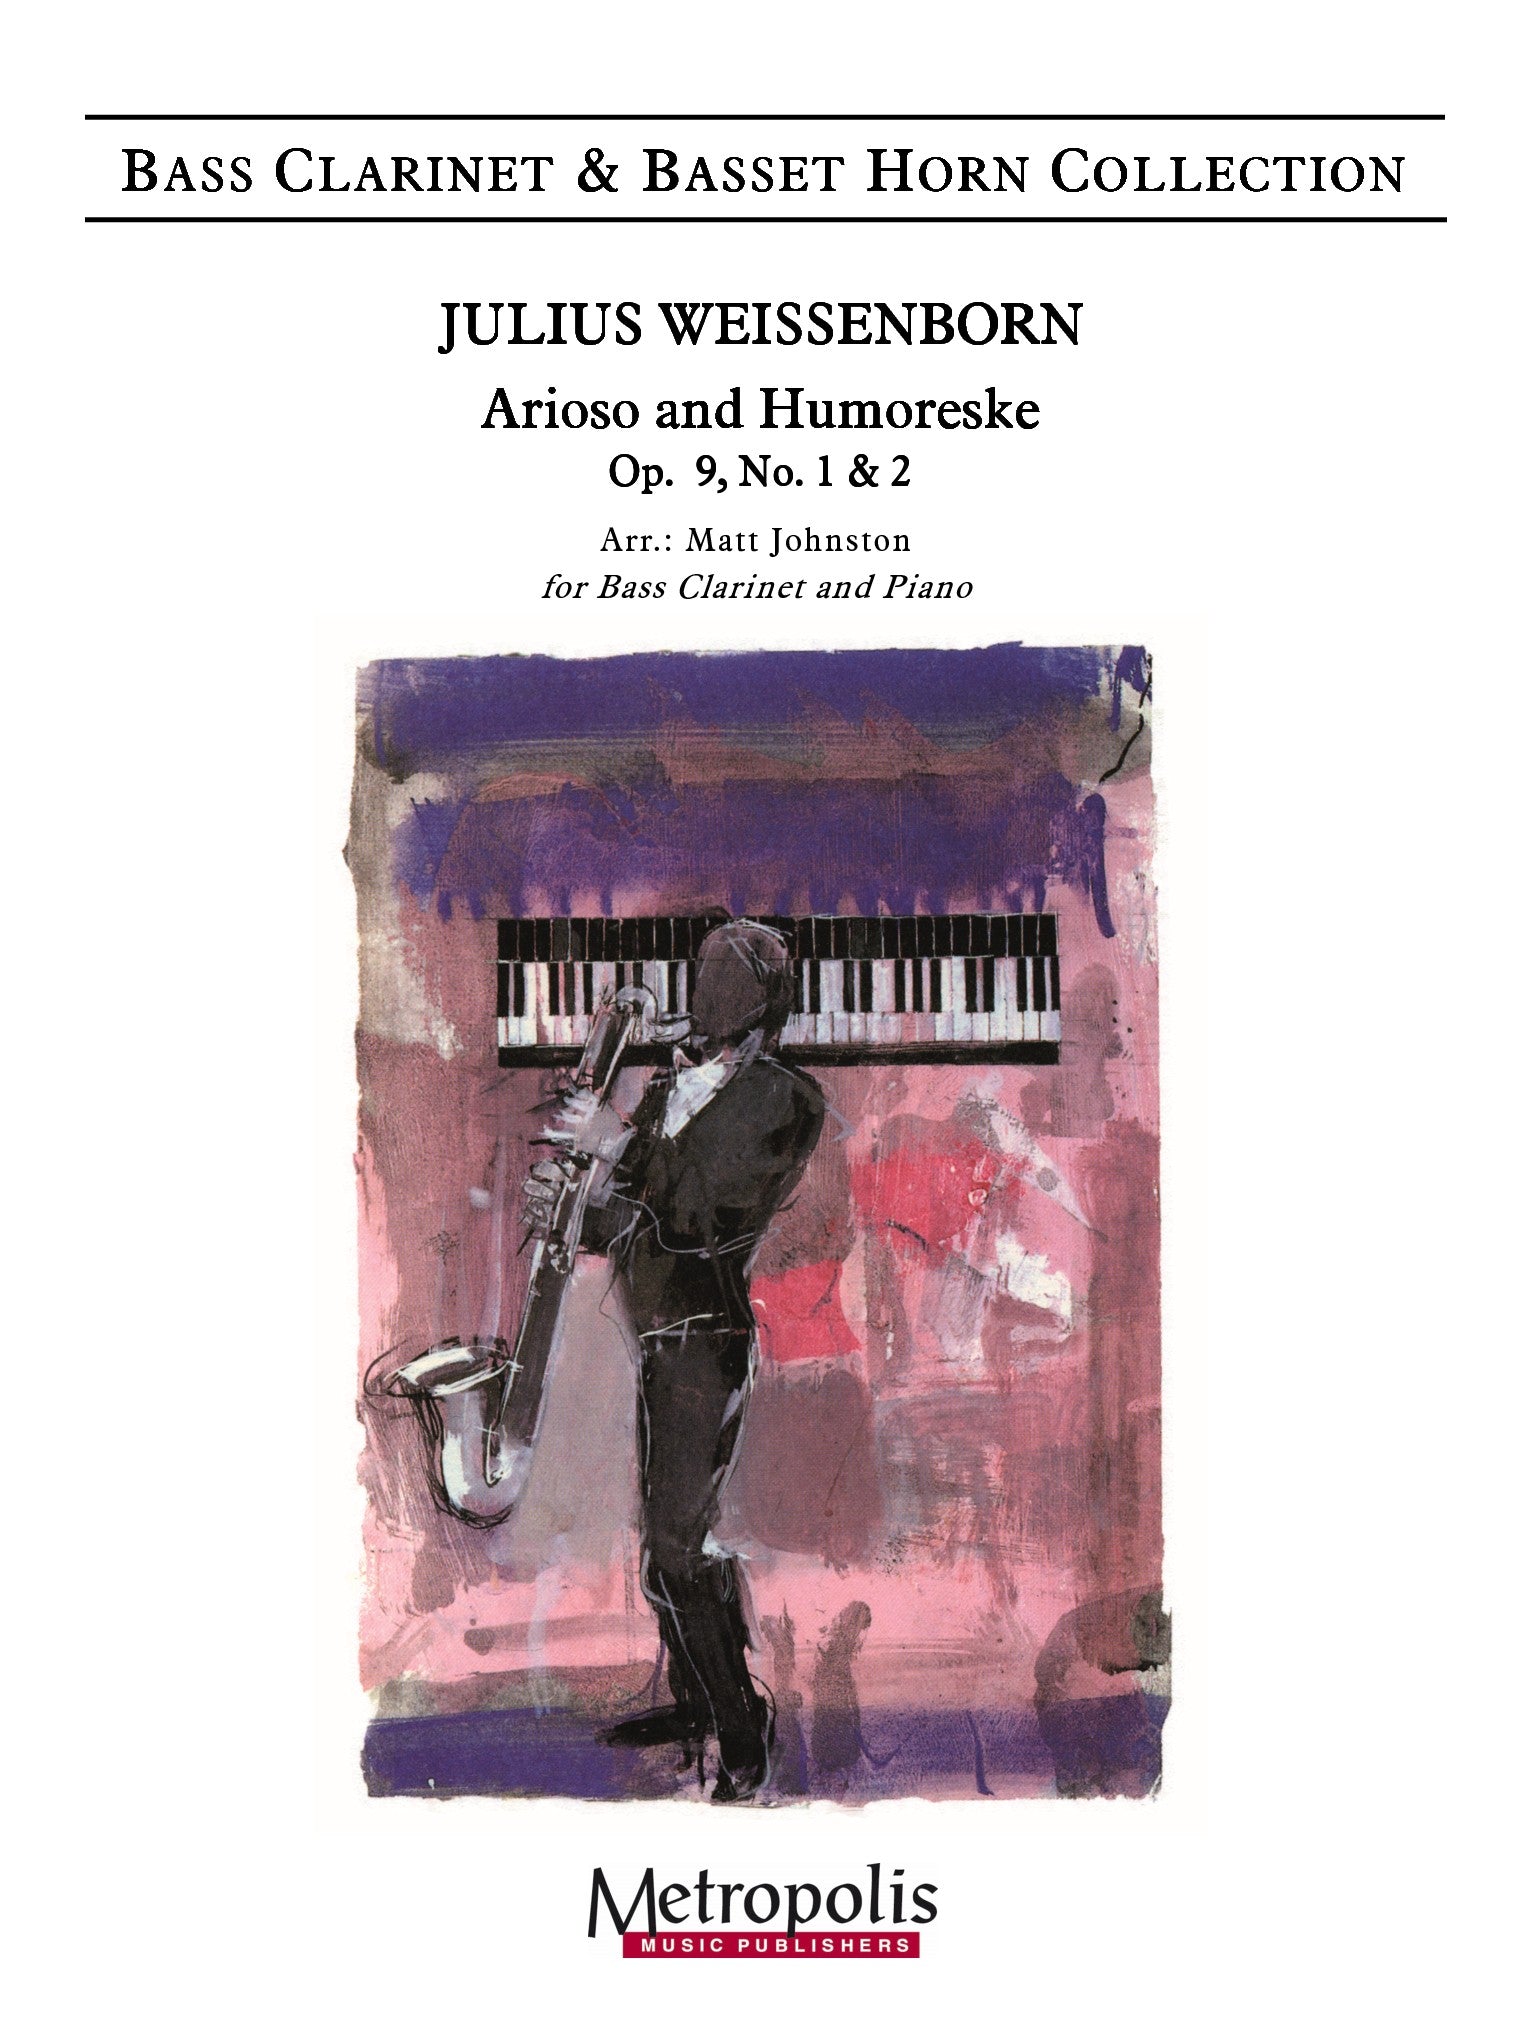 Weissenborn - Arioso and Humoreske, Op. 9, No. 1 & 2 for Bass Clarinet and Piano